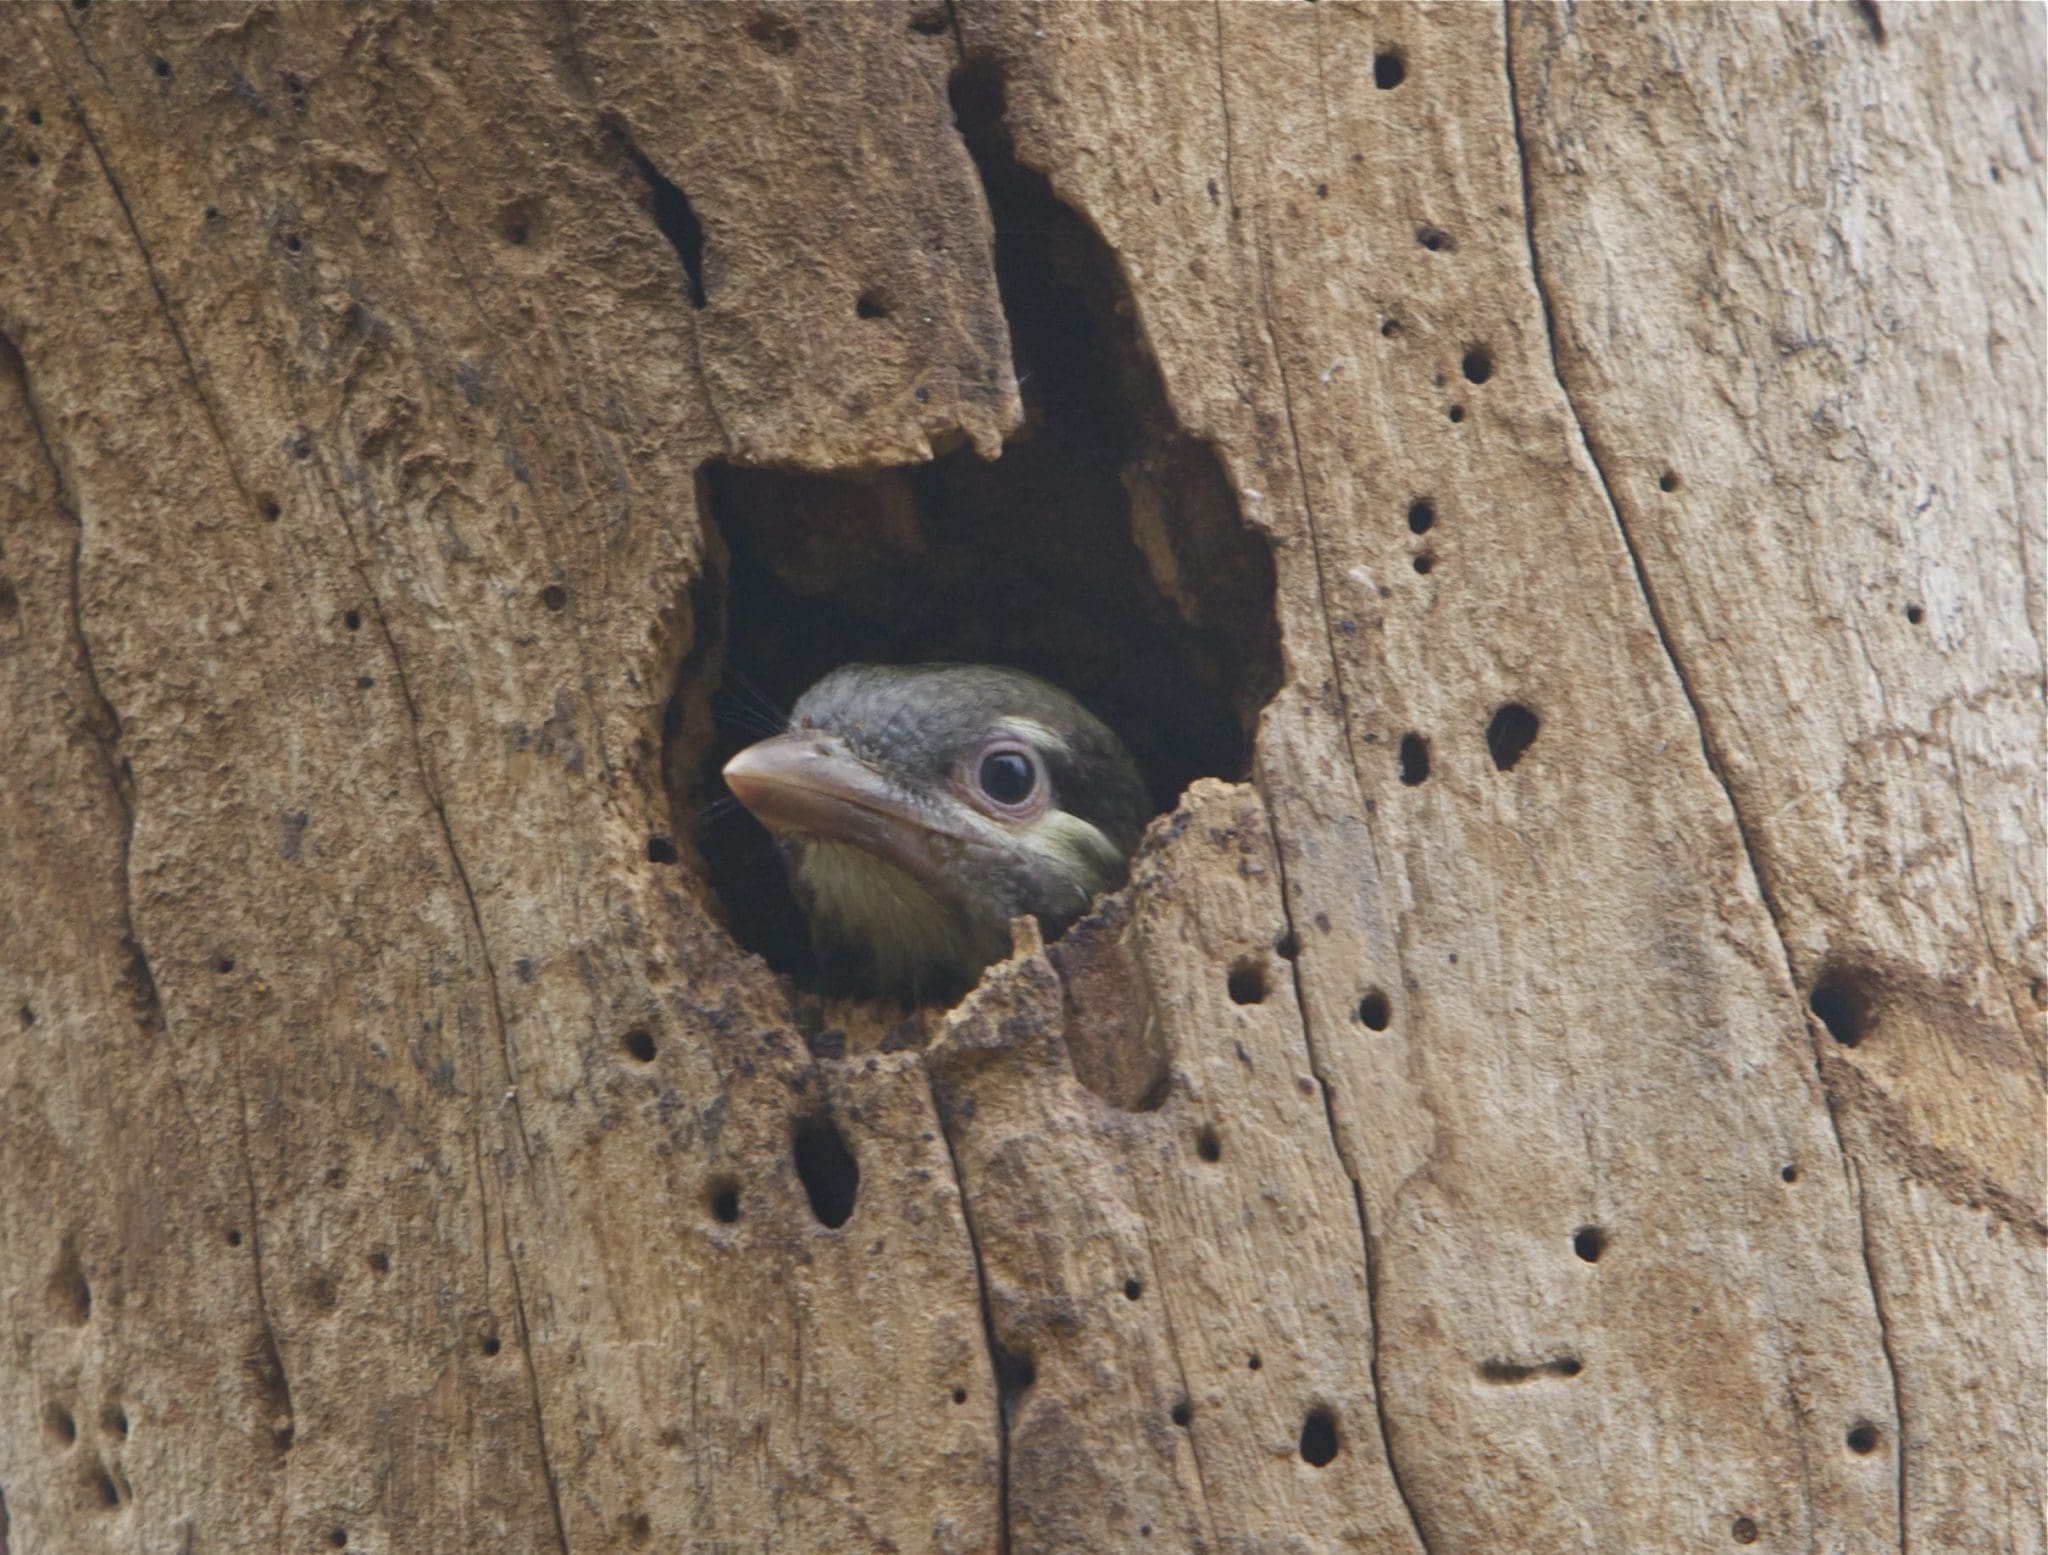 A young White Cheeked Barbet, through the window of opportunity